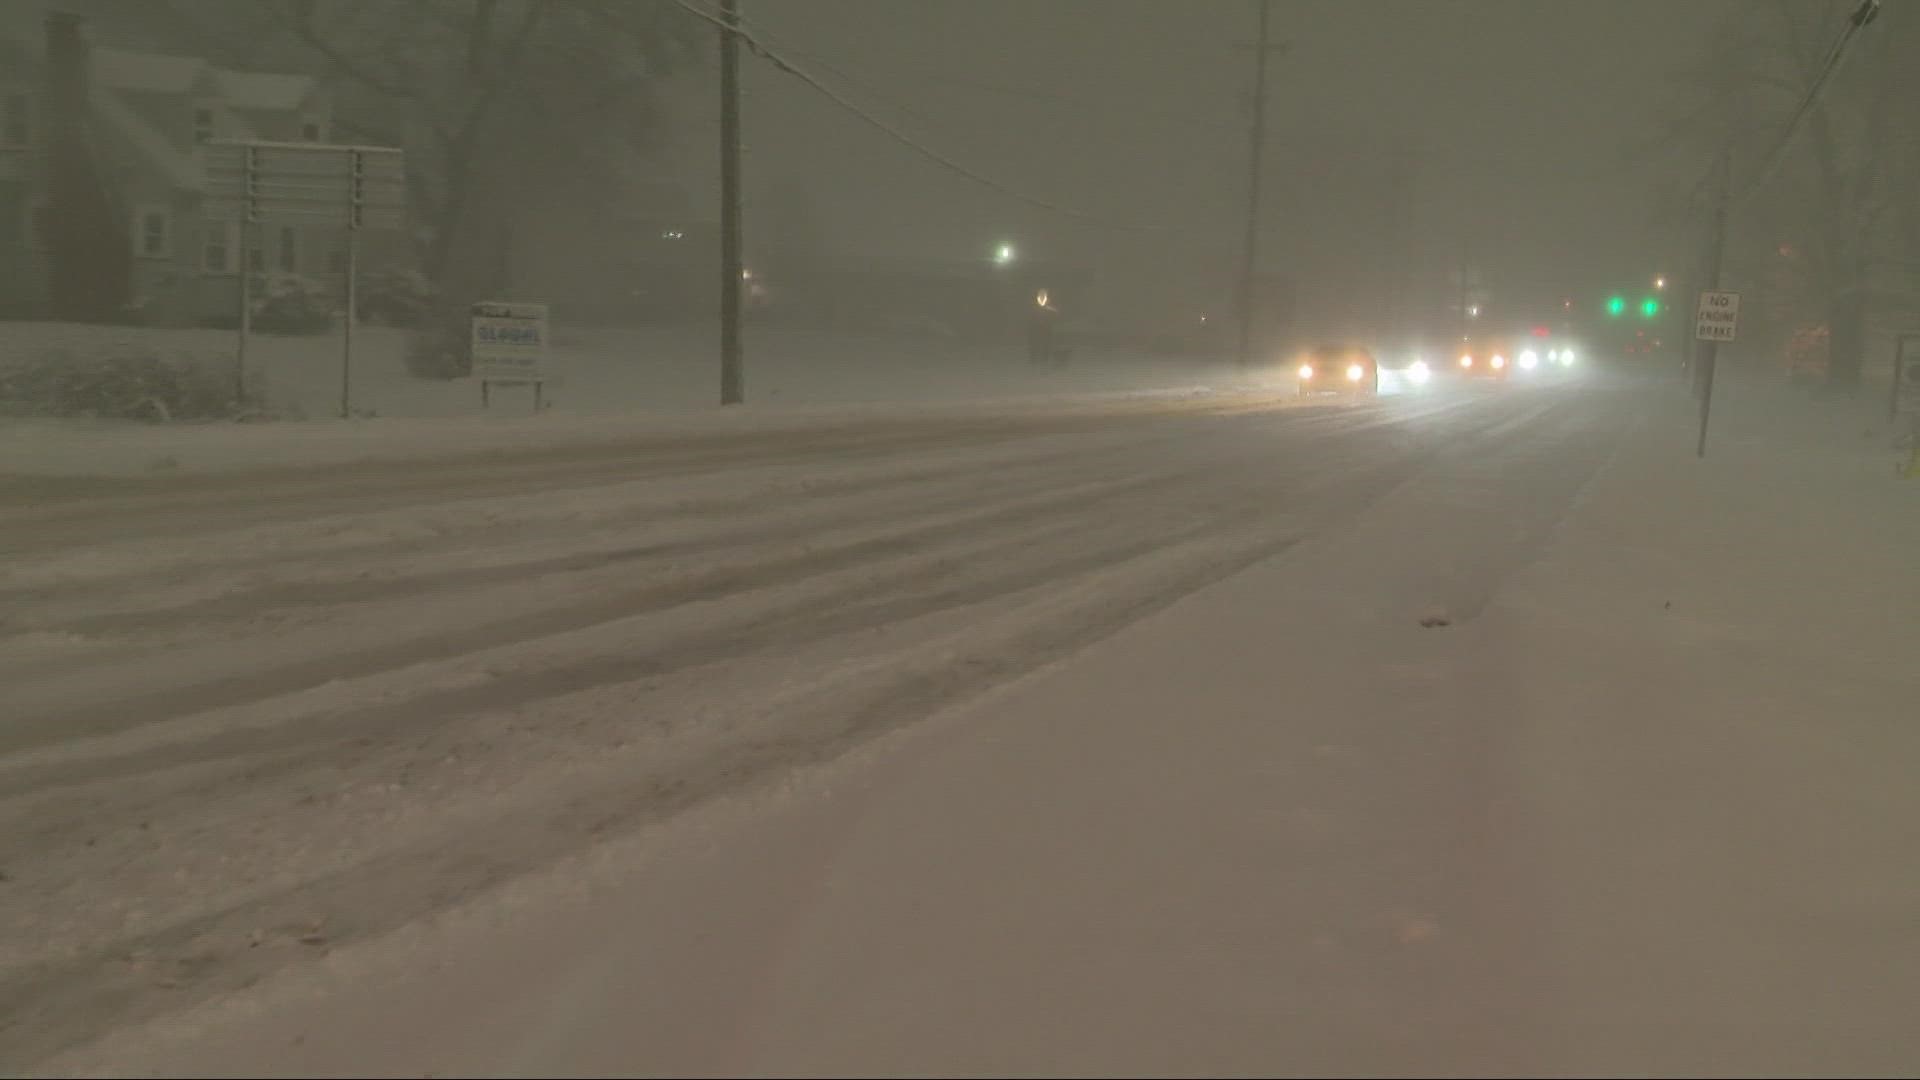 Multiple communities in Ashtabula County were hit with more than a foot of snow.